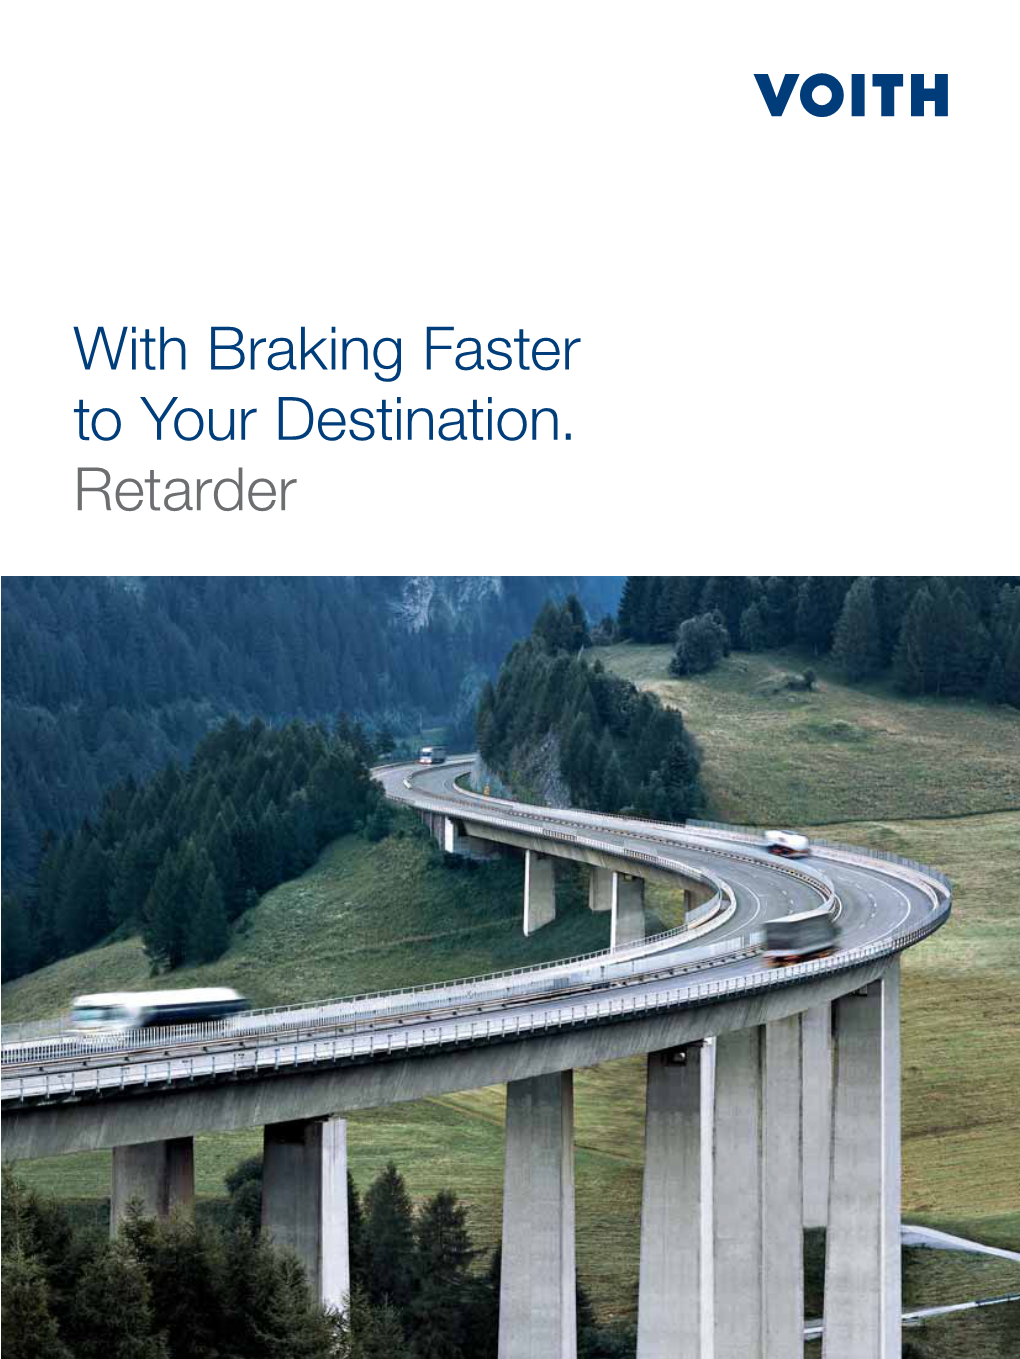 With Braking Faster to Your Destination. Retarder